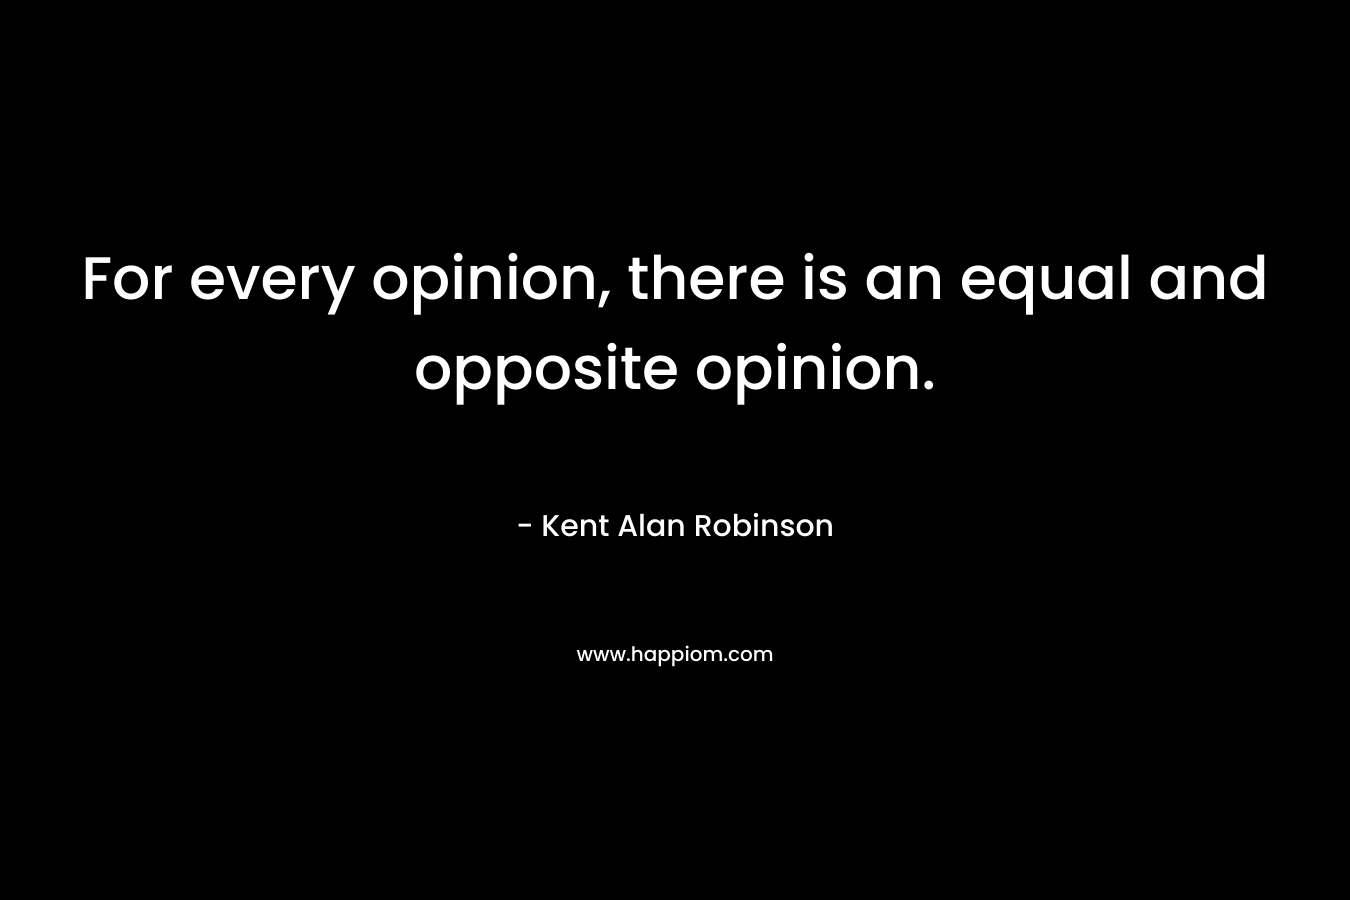 For every opinion, there is an equal and opposite opinion.